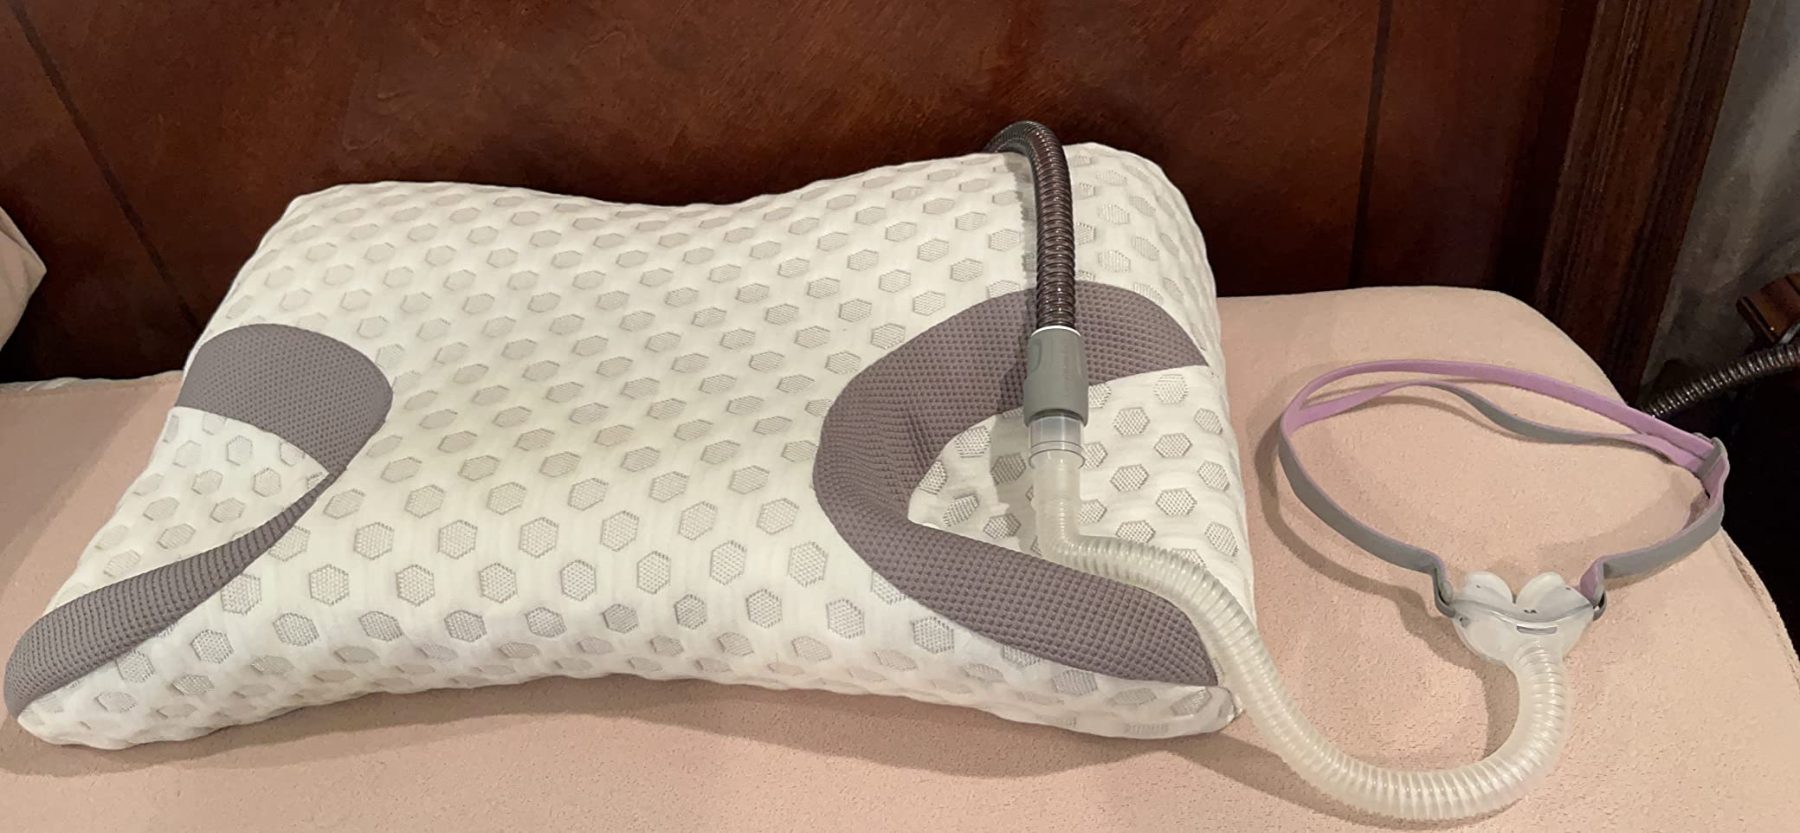 CPAP Memory Foam Pillow for Side Sleeper photo review